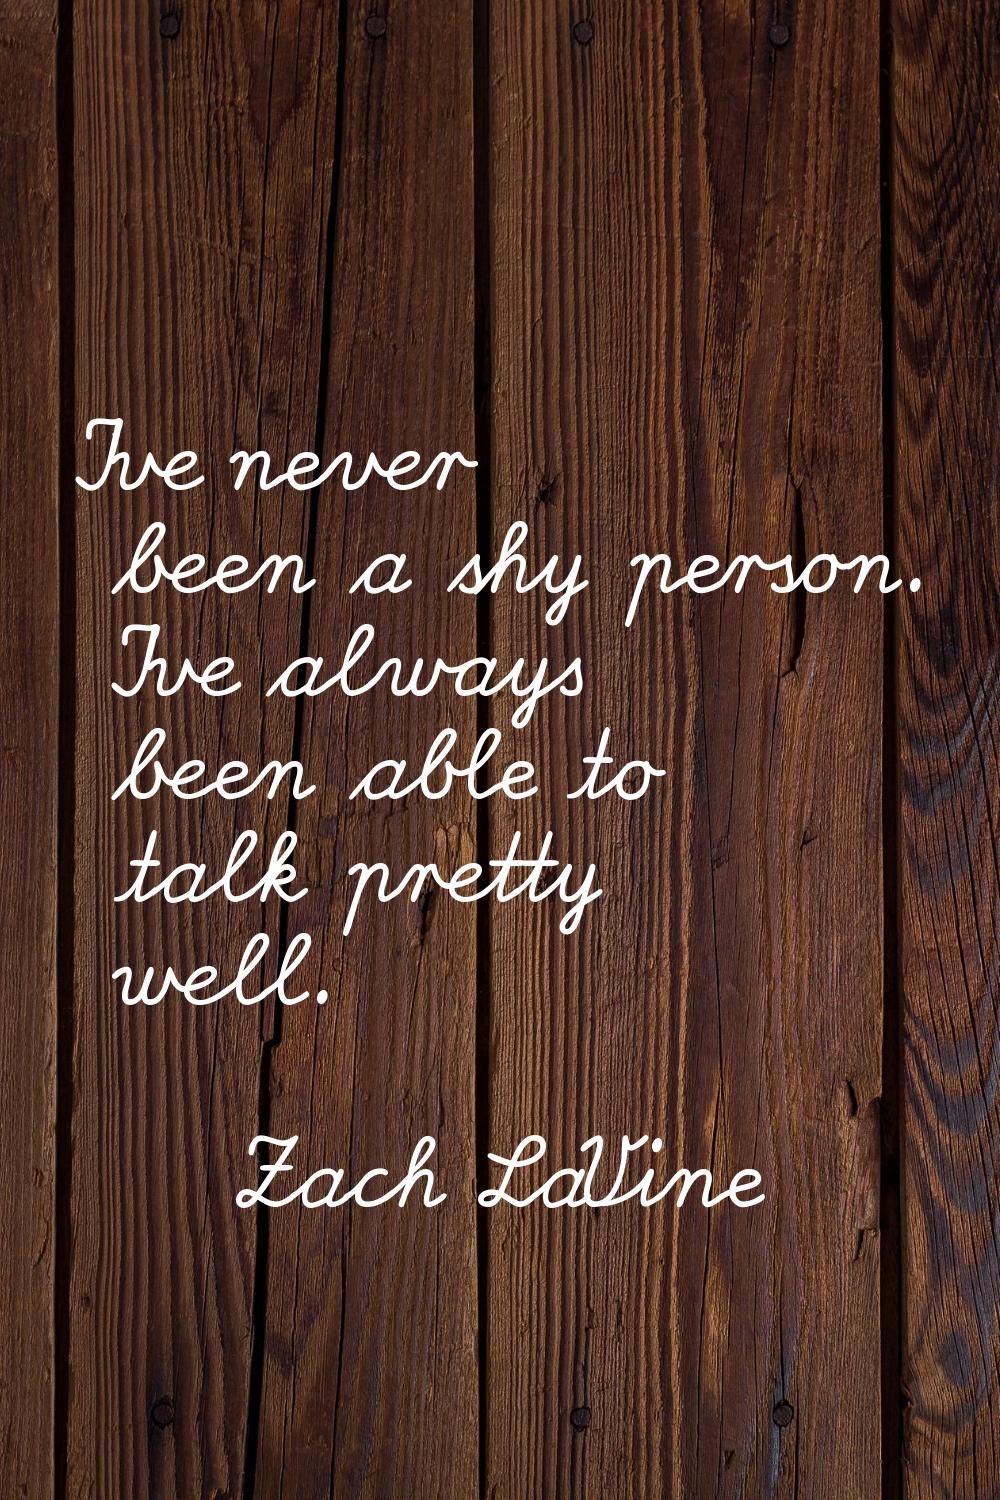 I've never been a shy person. I've always been able to talk pretty well.